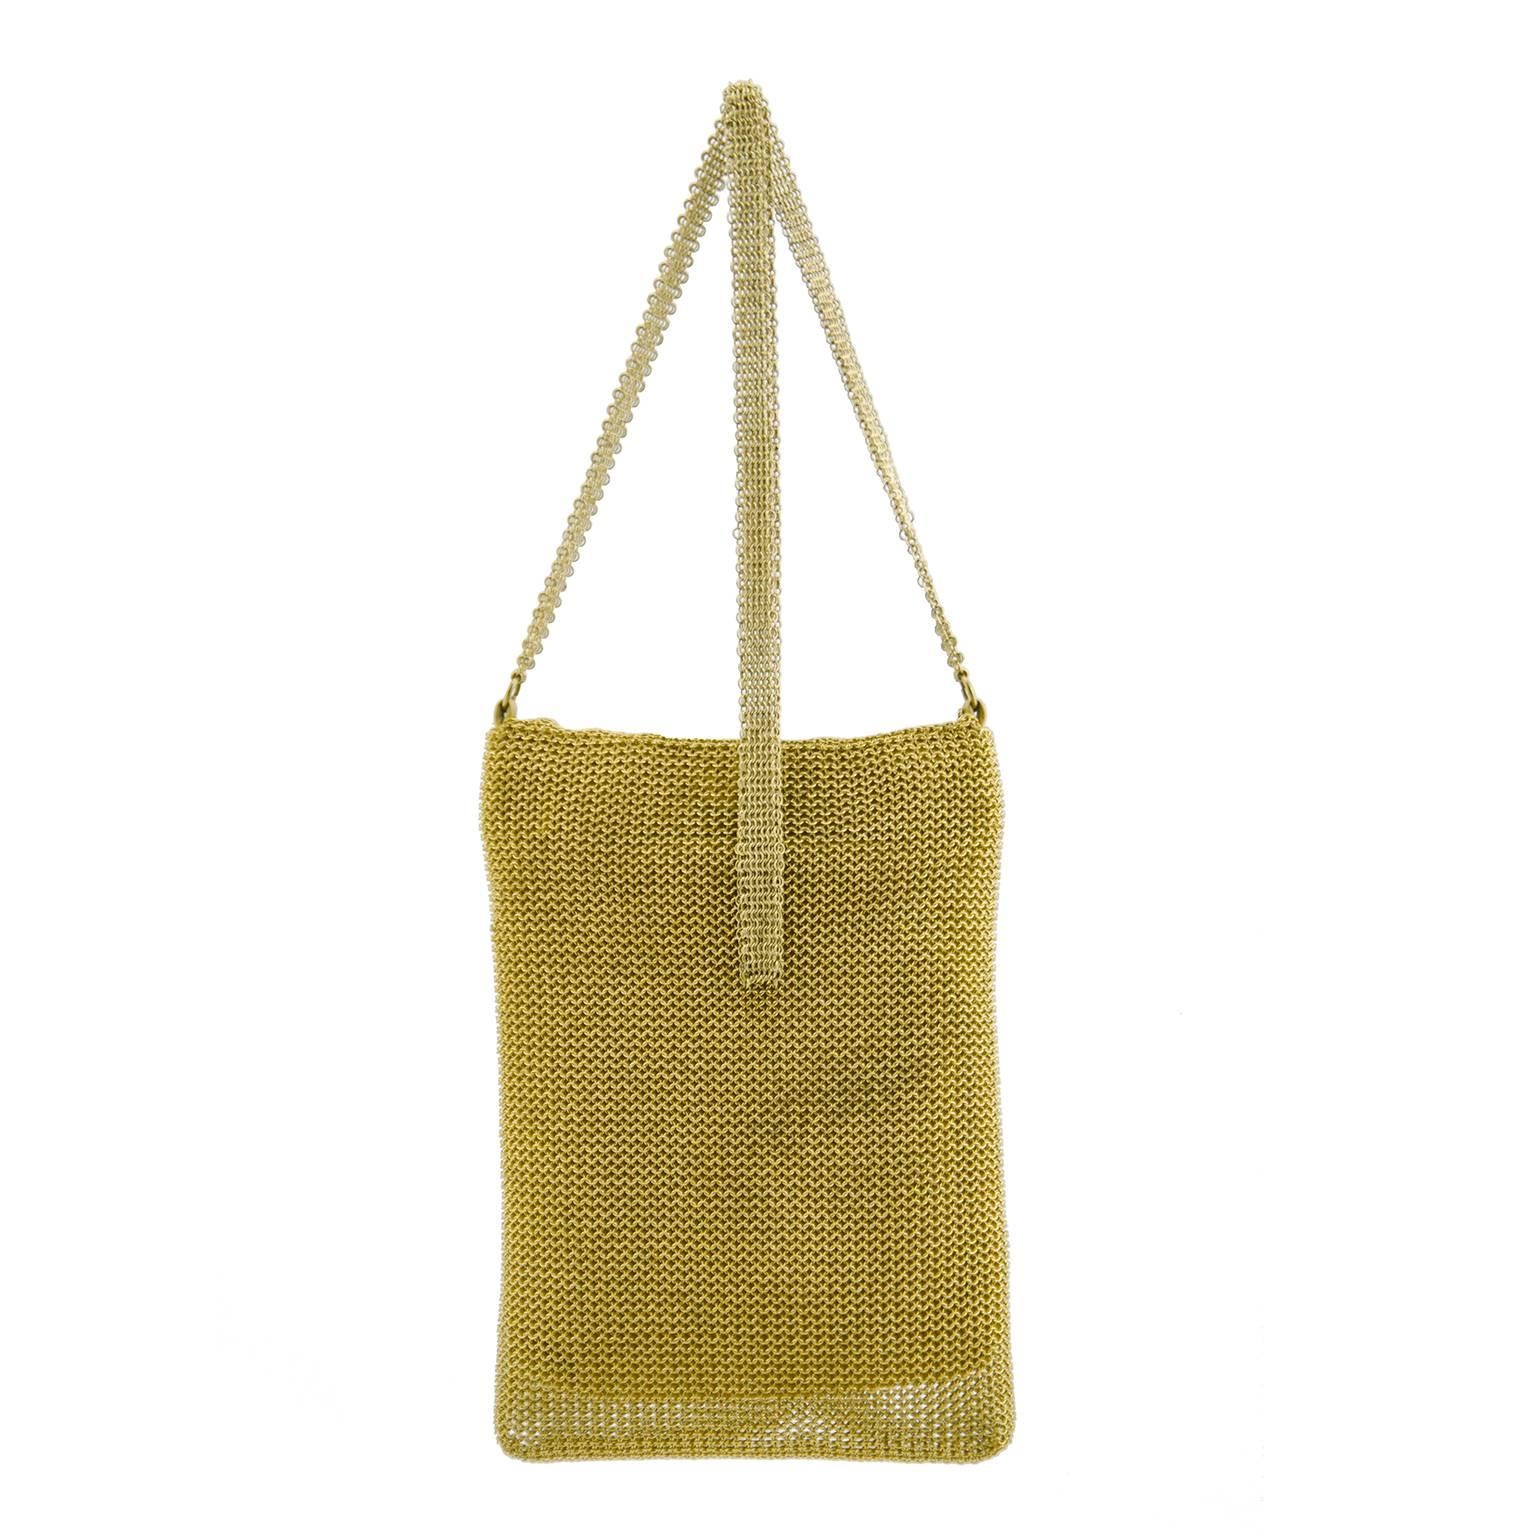 Gorgeous 1950s gold mesh chain link bag with a fold over flap. Medium length strap, could be worn cross body depending on your size. Snap closure and gold interior lining. In excellent vintage condition, light marking throughout interior. Overall a